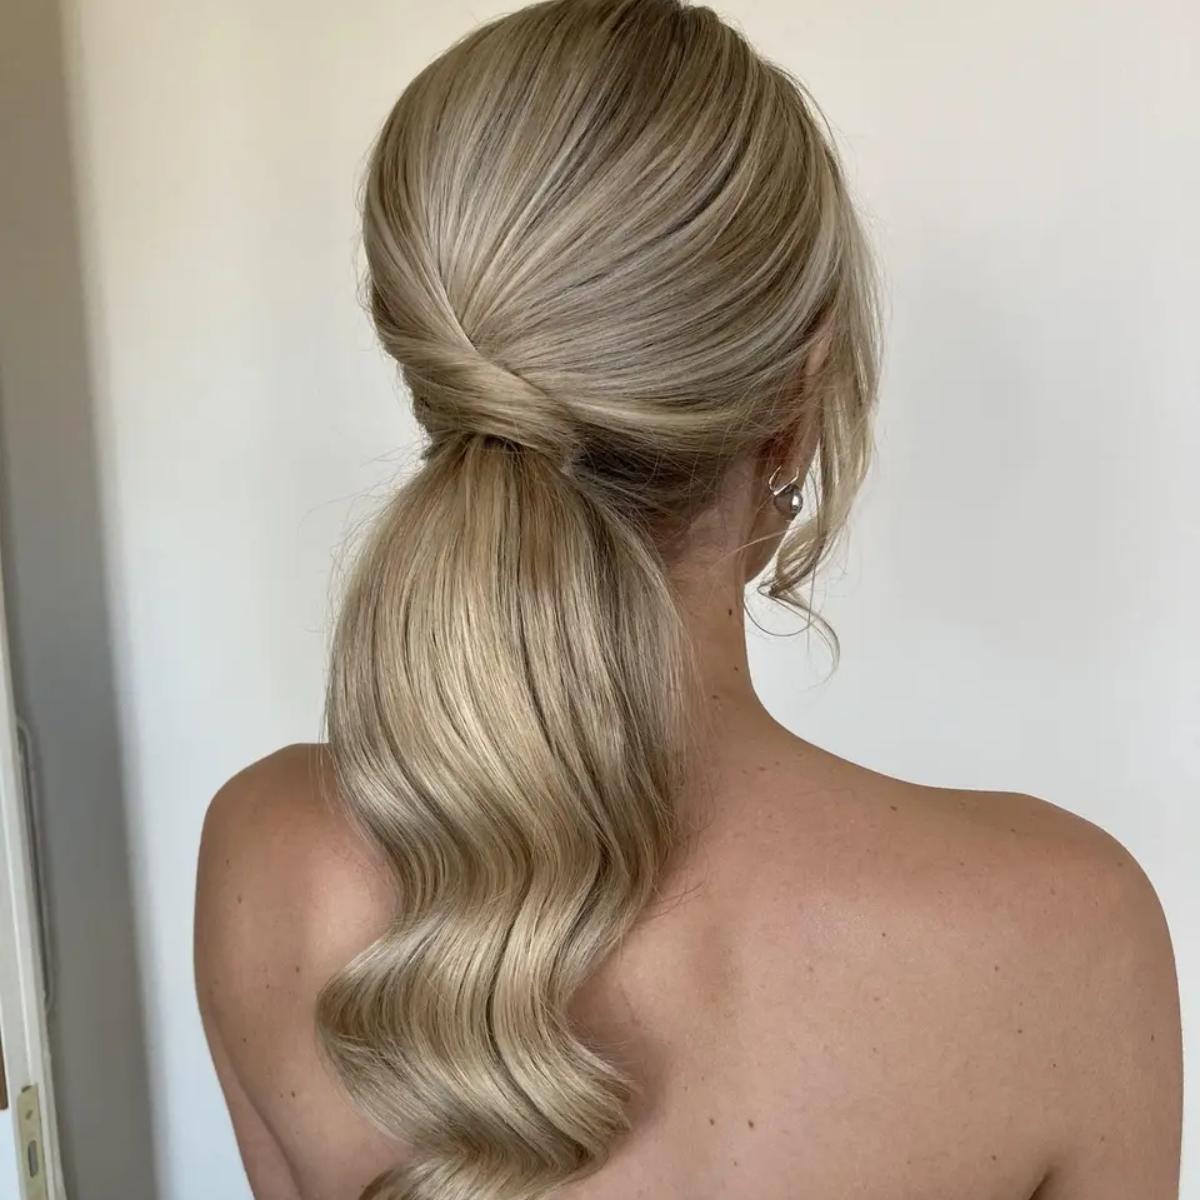 💃🏼 Fancy up your ponytail with one simple step. 🙌🏼 #hair #hairstyle # hairstyles #ponytail #pony #twist #fancy #formal #business #workstyle  #simple #easy... | By Natural Beauty by Melissa Rae | If you